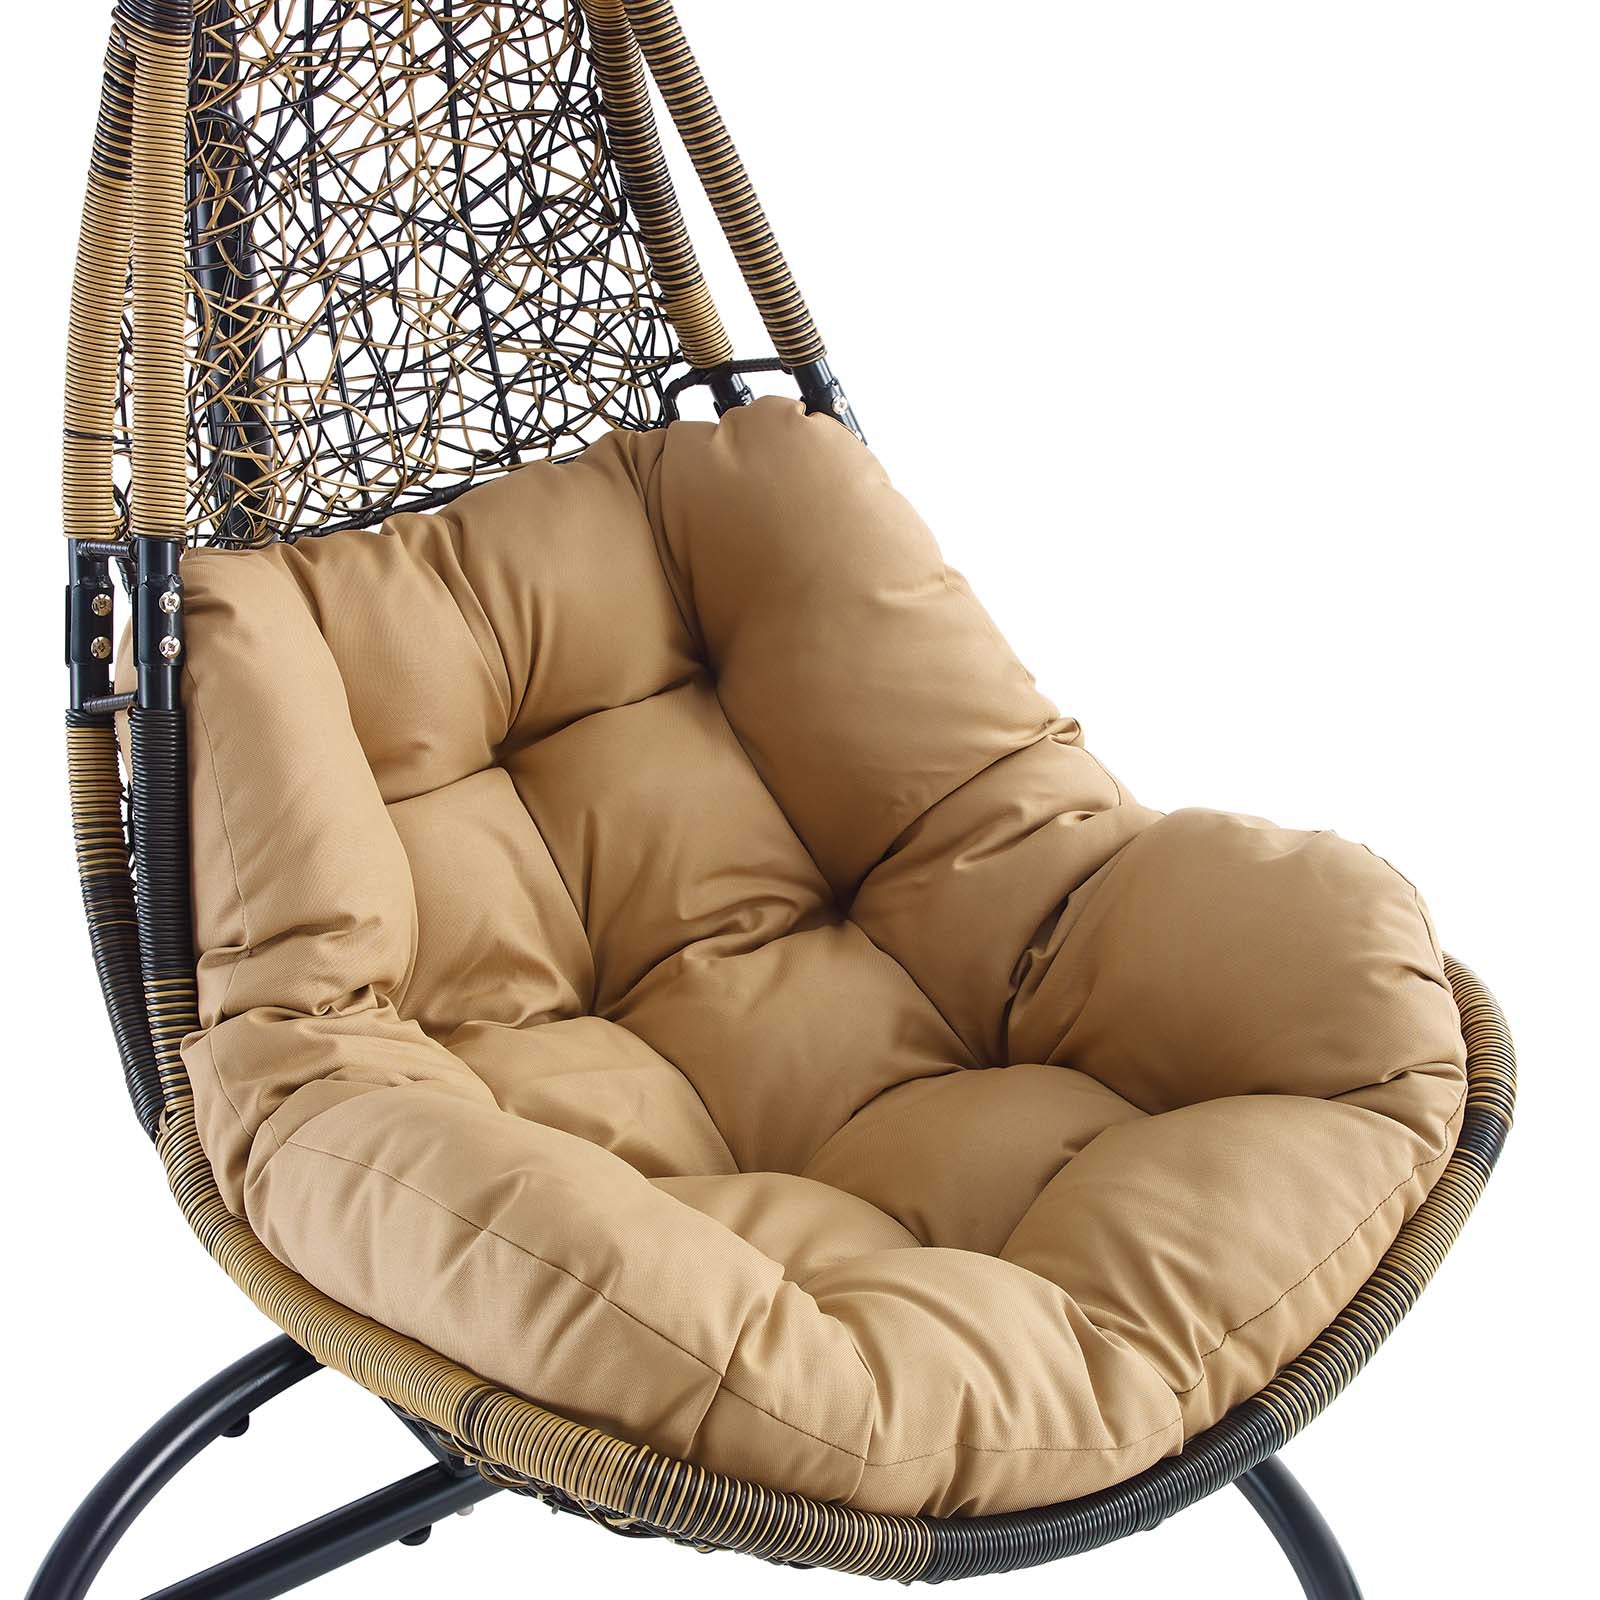 abate outdoor patio swing chair with stand